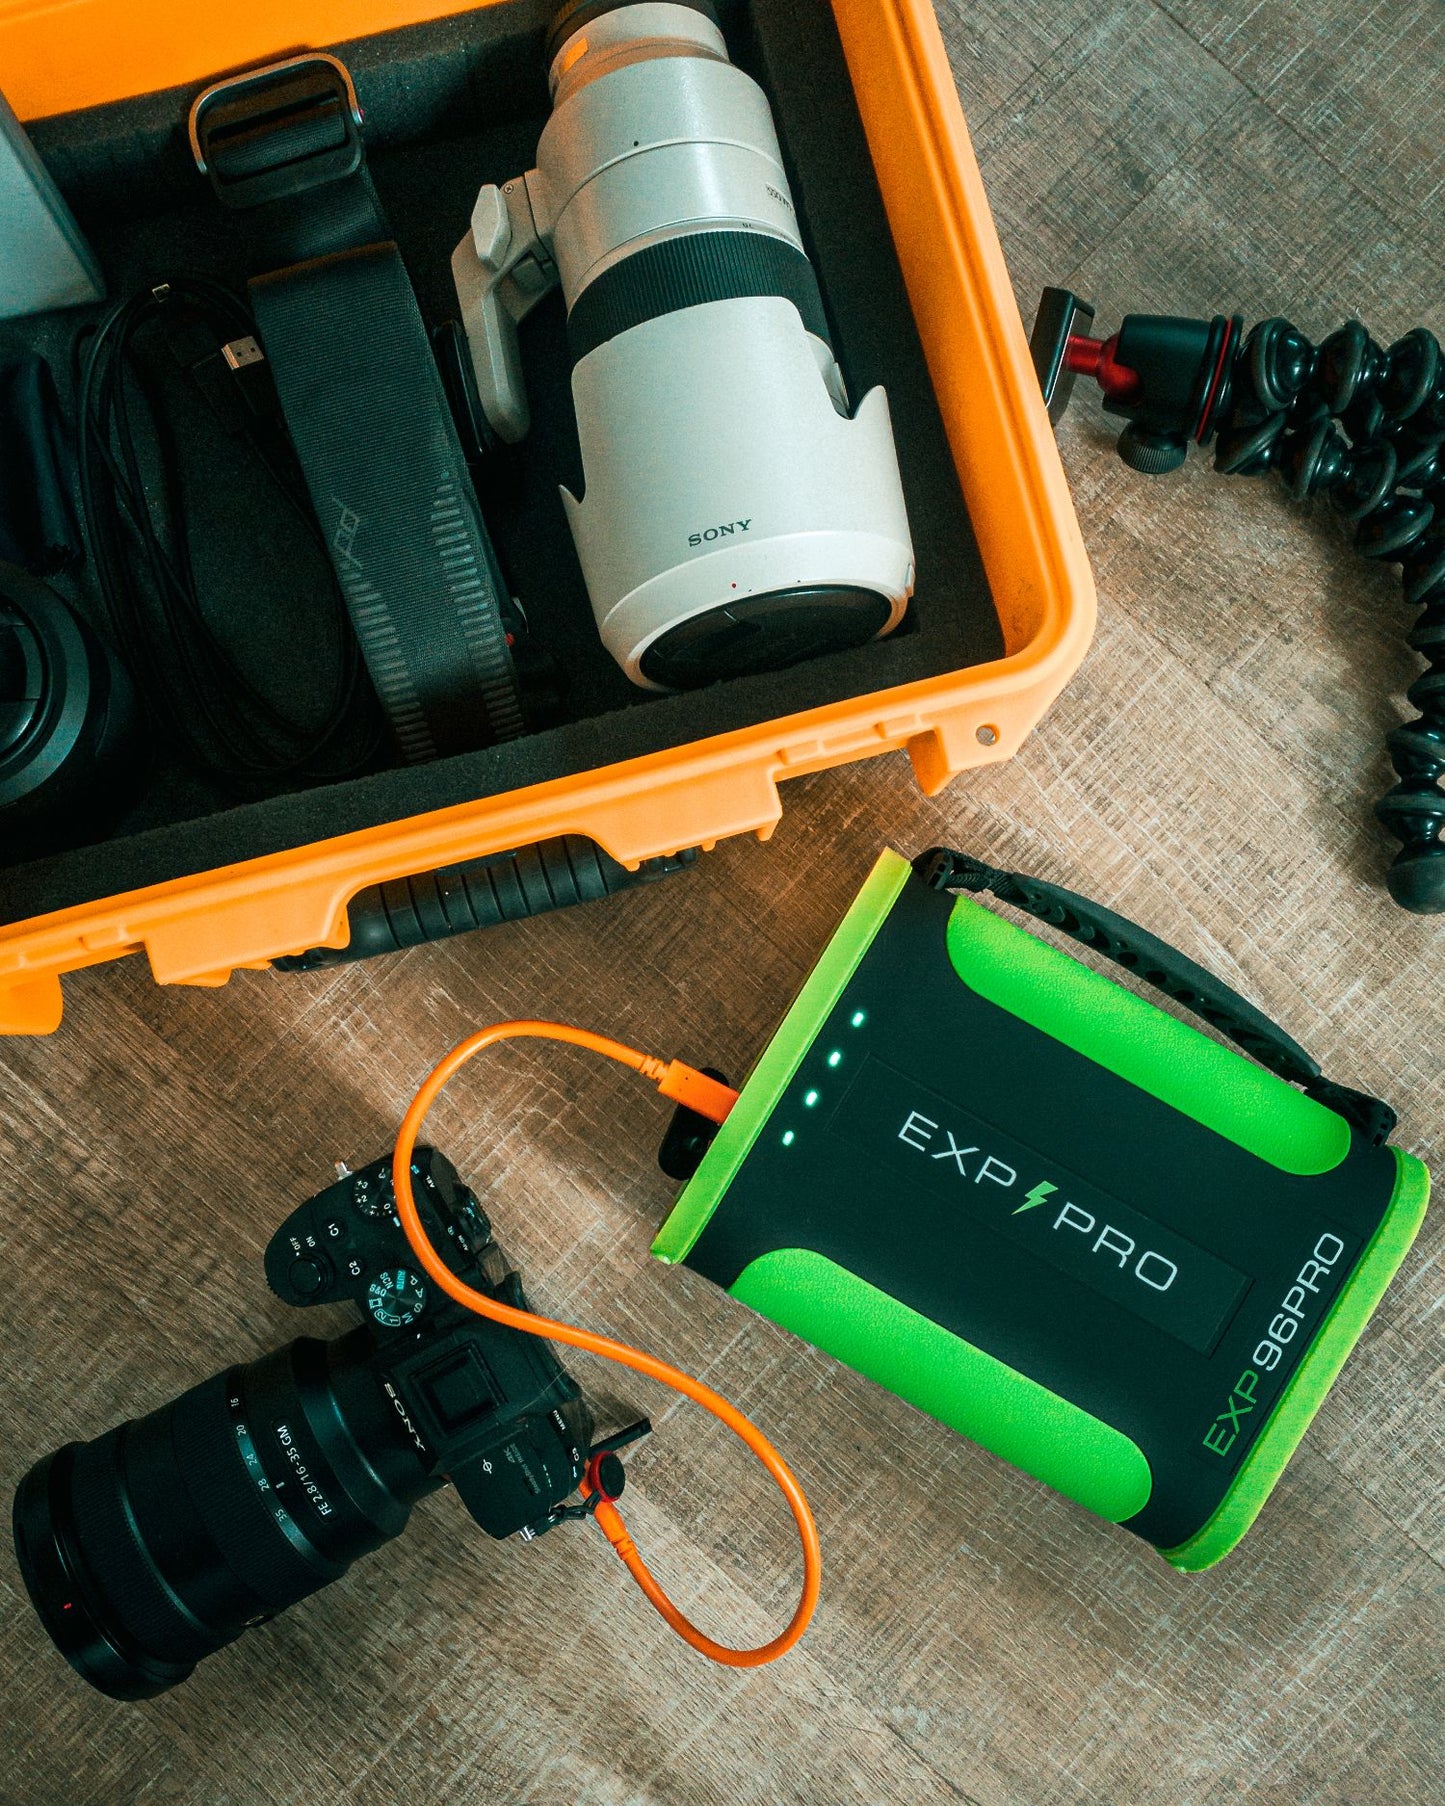 EXP96PRO Battery Bank connected to camera.